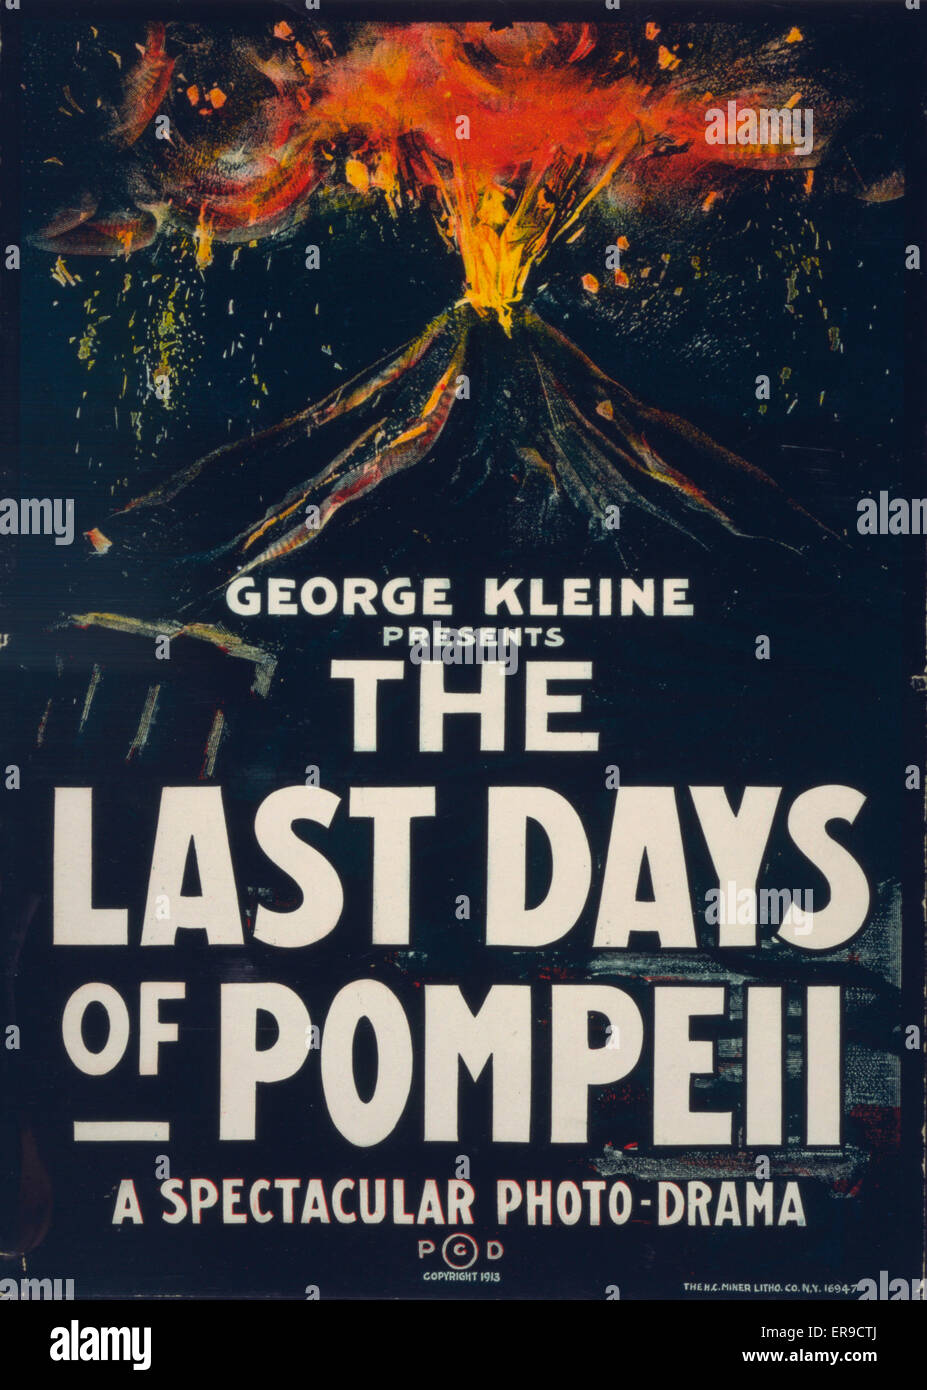 George Kleine presents, The Last Days of Pompeii, a spectacular photo-drama. Poster for motion picture, The Last Days of Pompeii, showing erupting volcano. Date c1913. Stock Photo